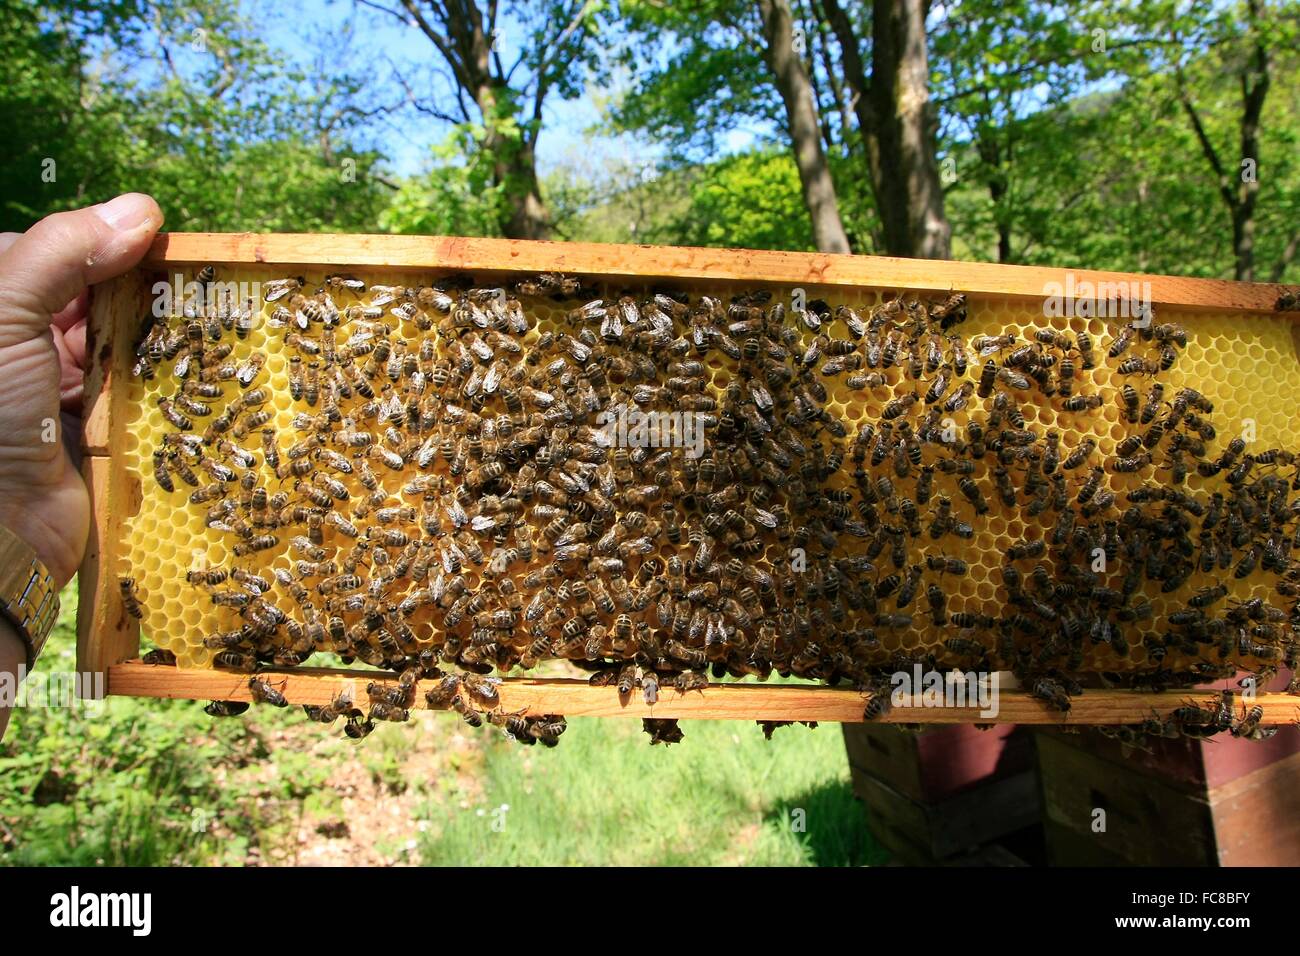 A fresh-built drone comb. They are used in the spring to reduce the population of varroa mites (Varroa destructor). The Varroa is a parasite that infects honey bees (Apis mellifera) and damages bee colonies. Thueringia, Germany, Europa Date: May 15, 2015 Stock Photo